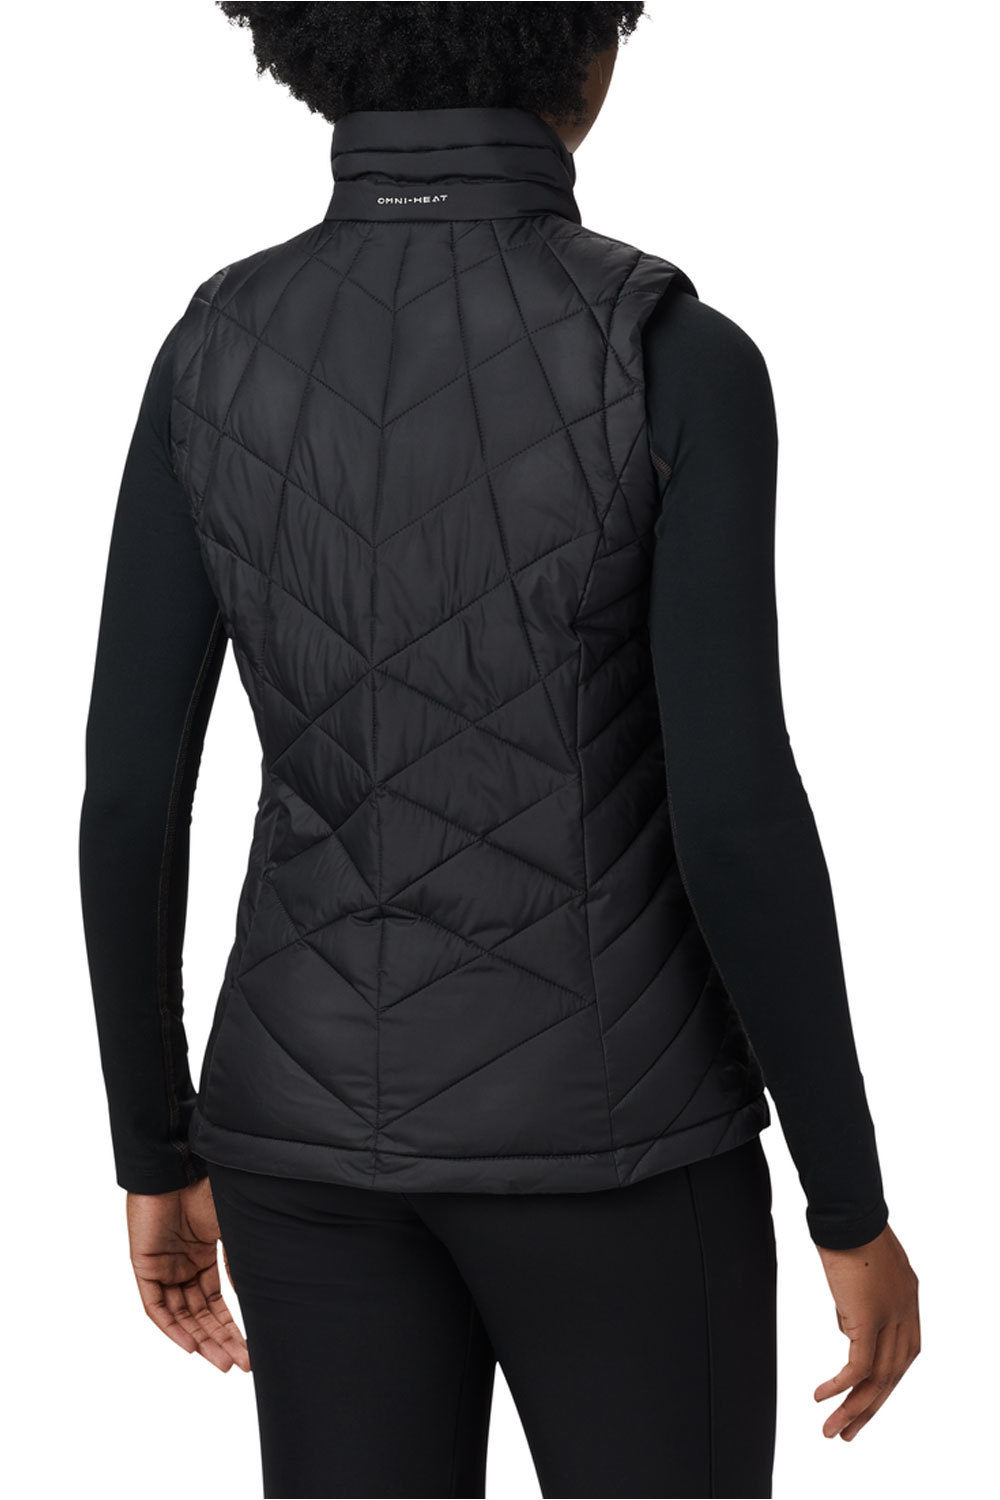 Columbia chaleco outdoor mujer Heavenly Vest vista trasera